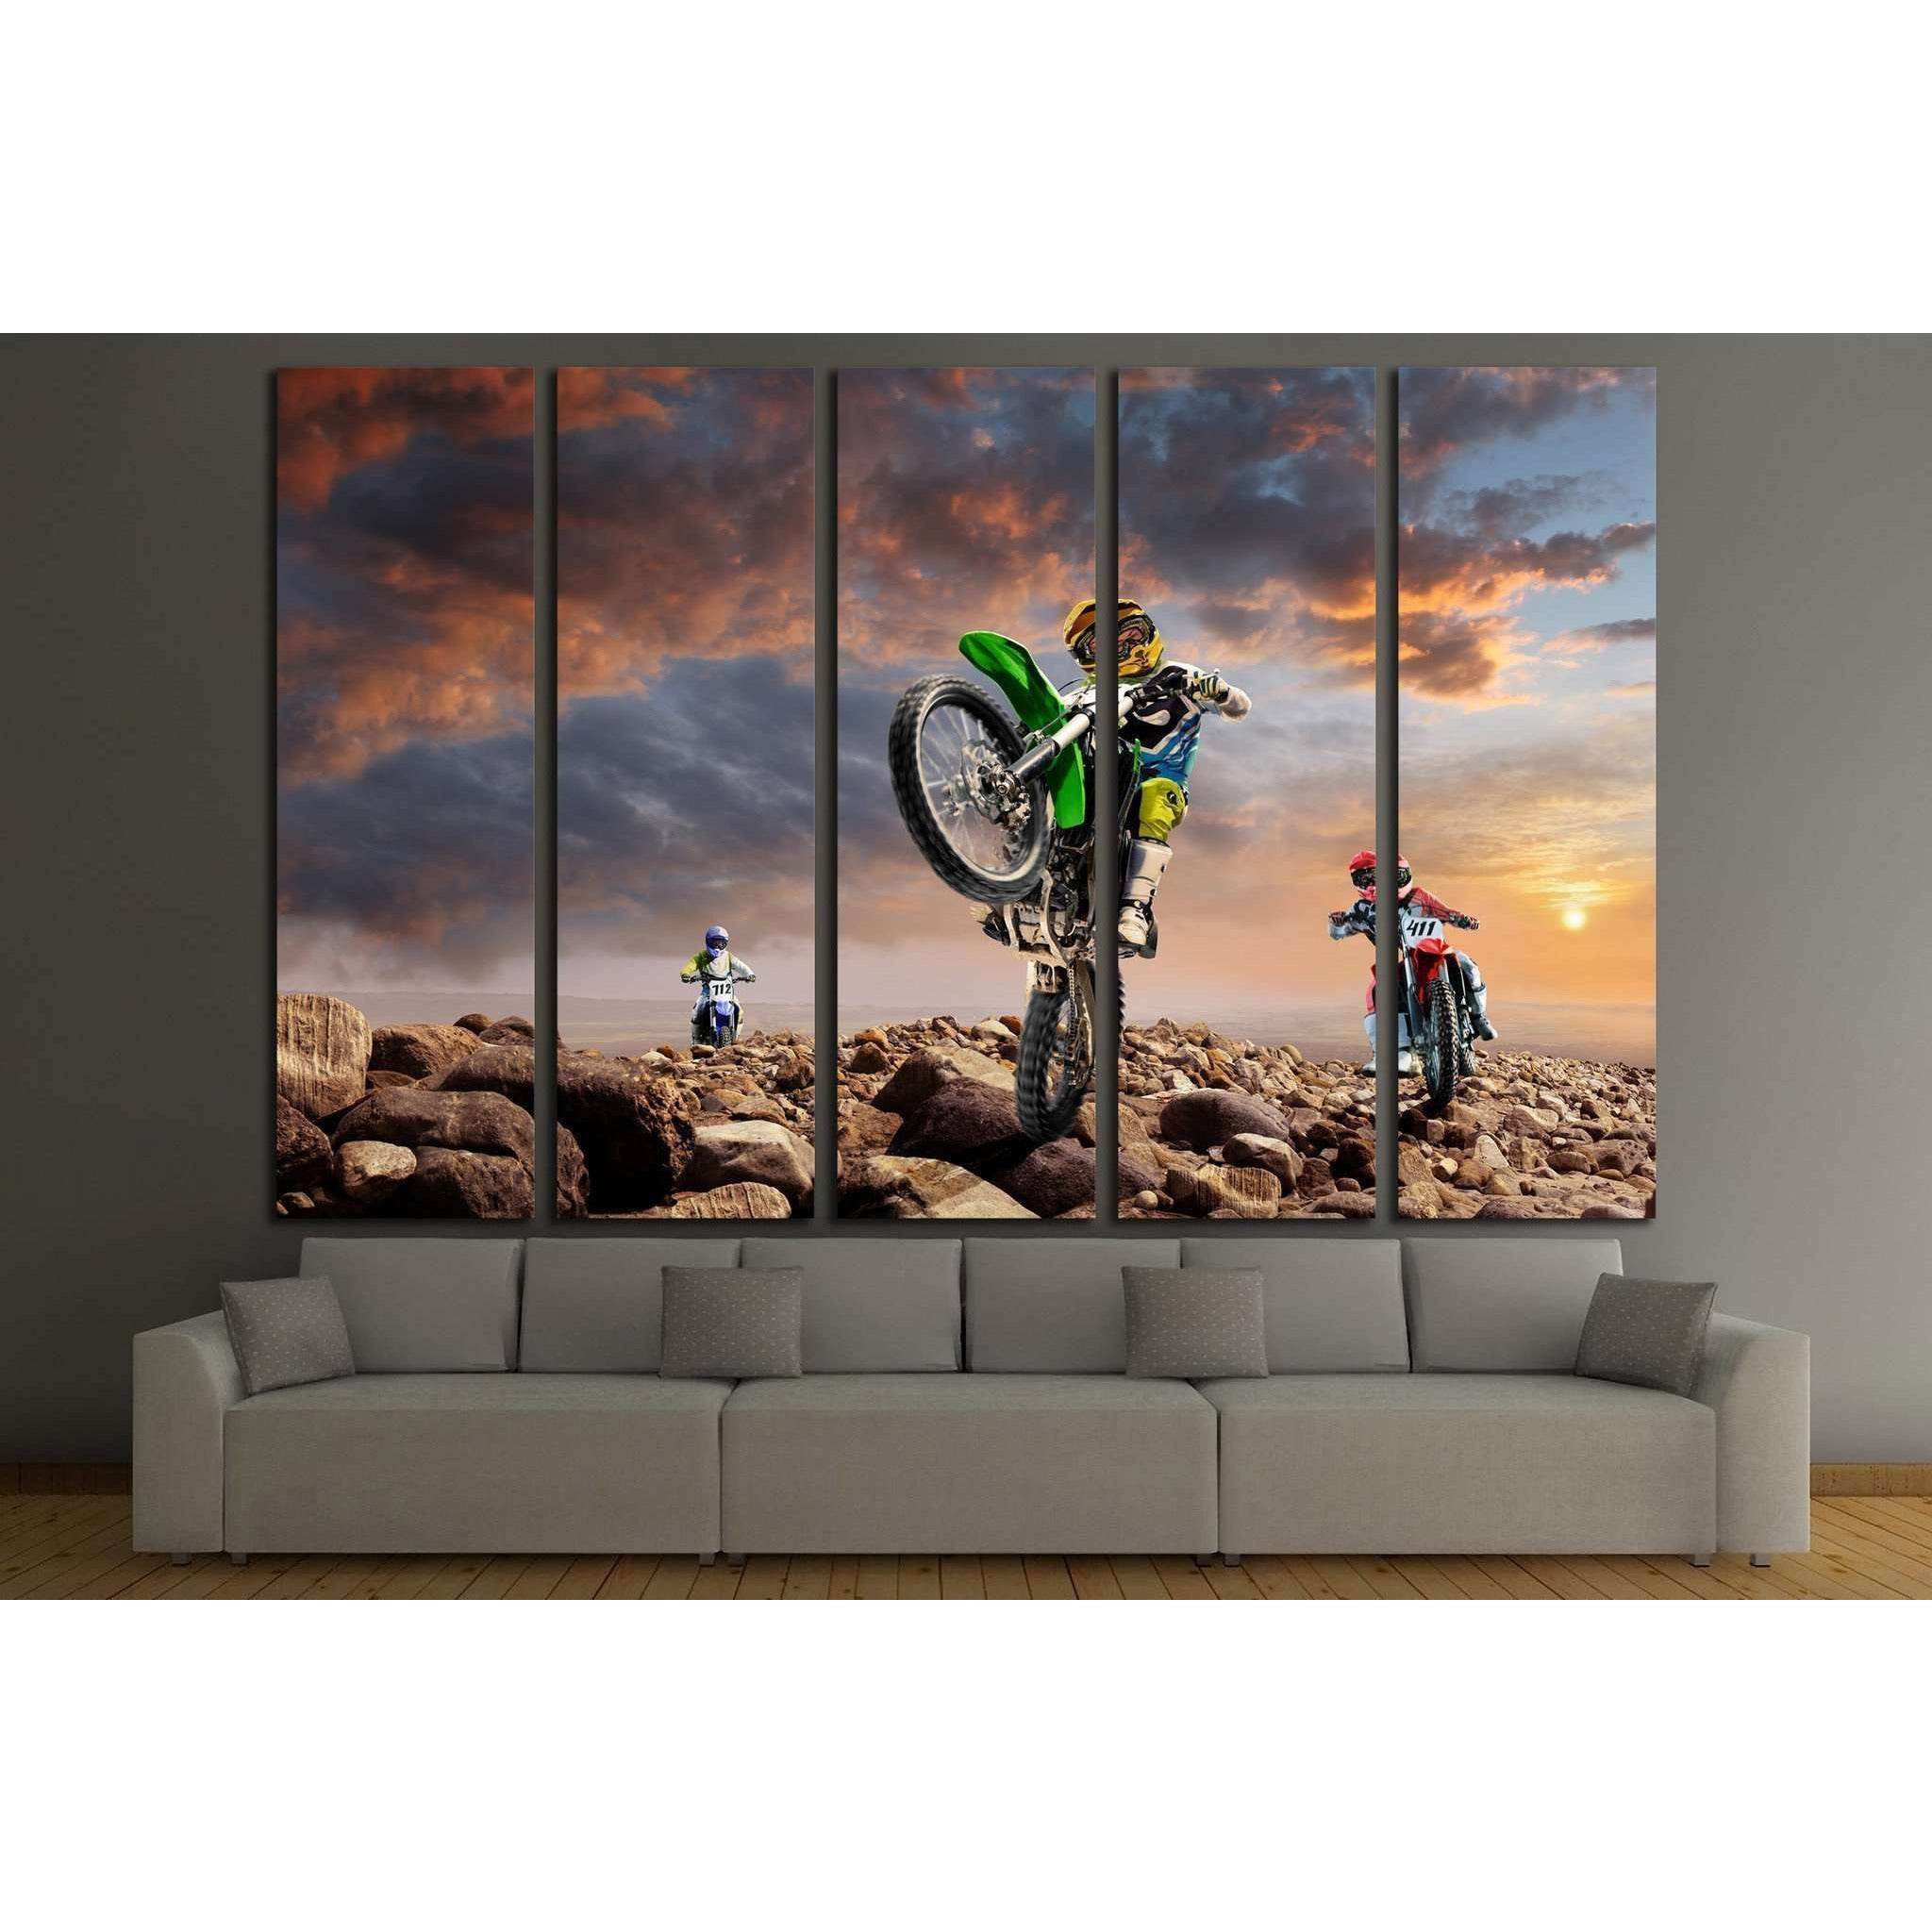 Professional dirt bike riders on top of vulcan №1890 Ready to Hang Canvas Print